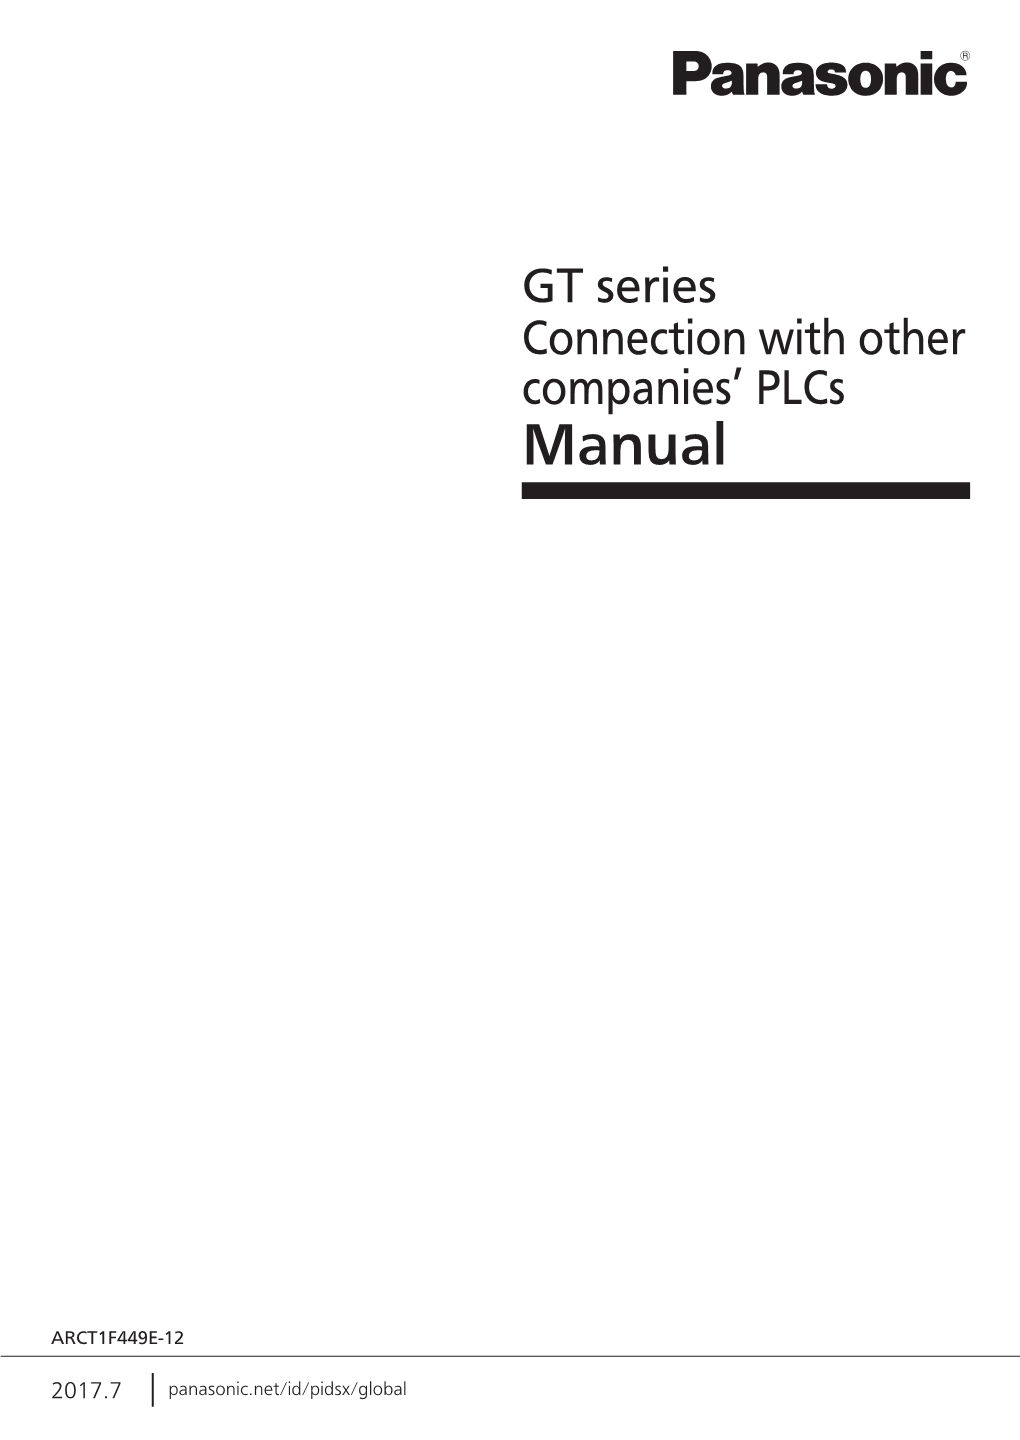 GT Series Connection with Other Companies' Plcs Manual